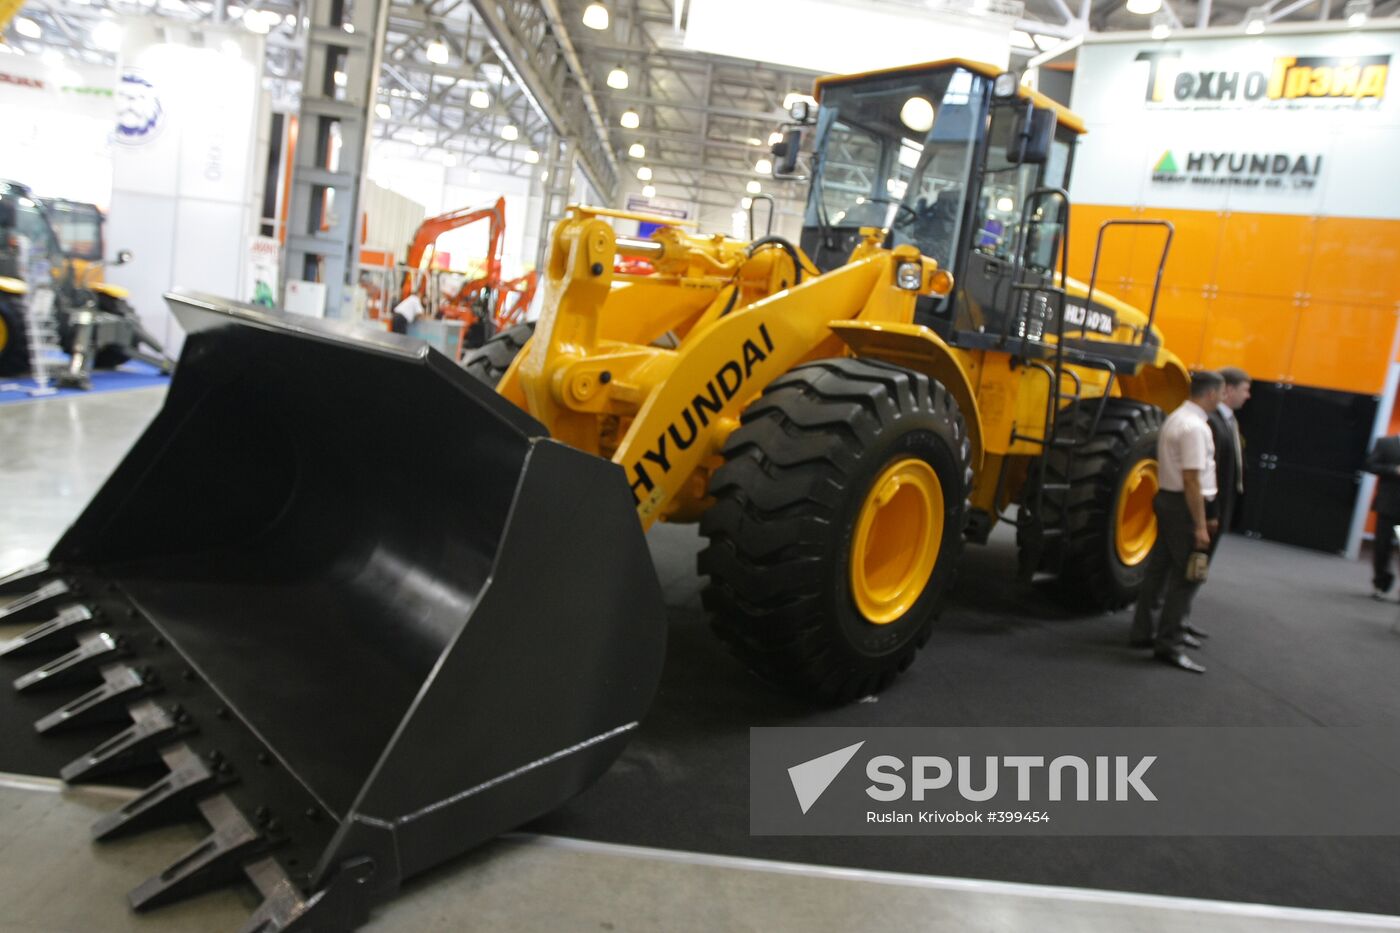 Exhibition "Construction Equipment and Technologies"